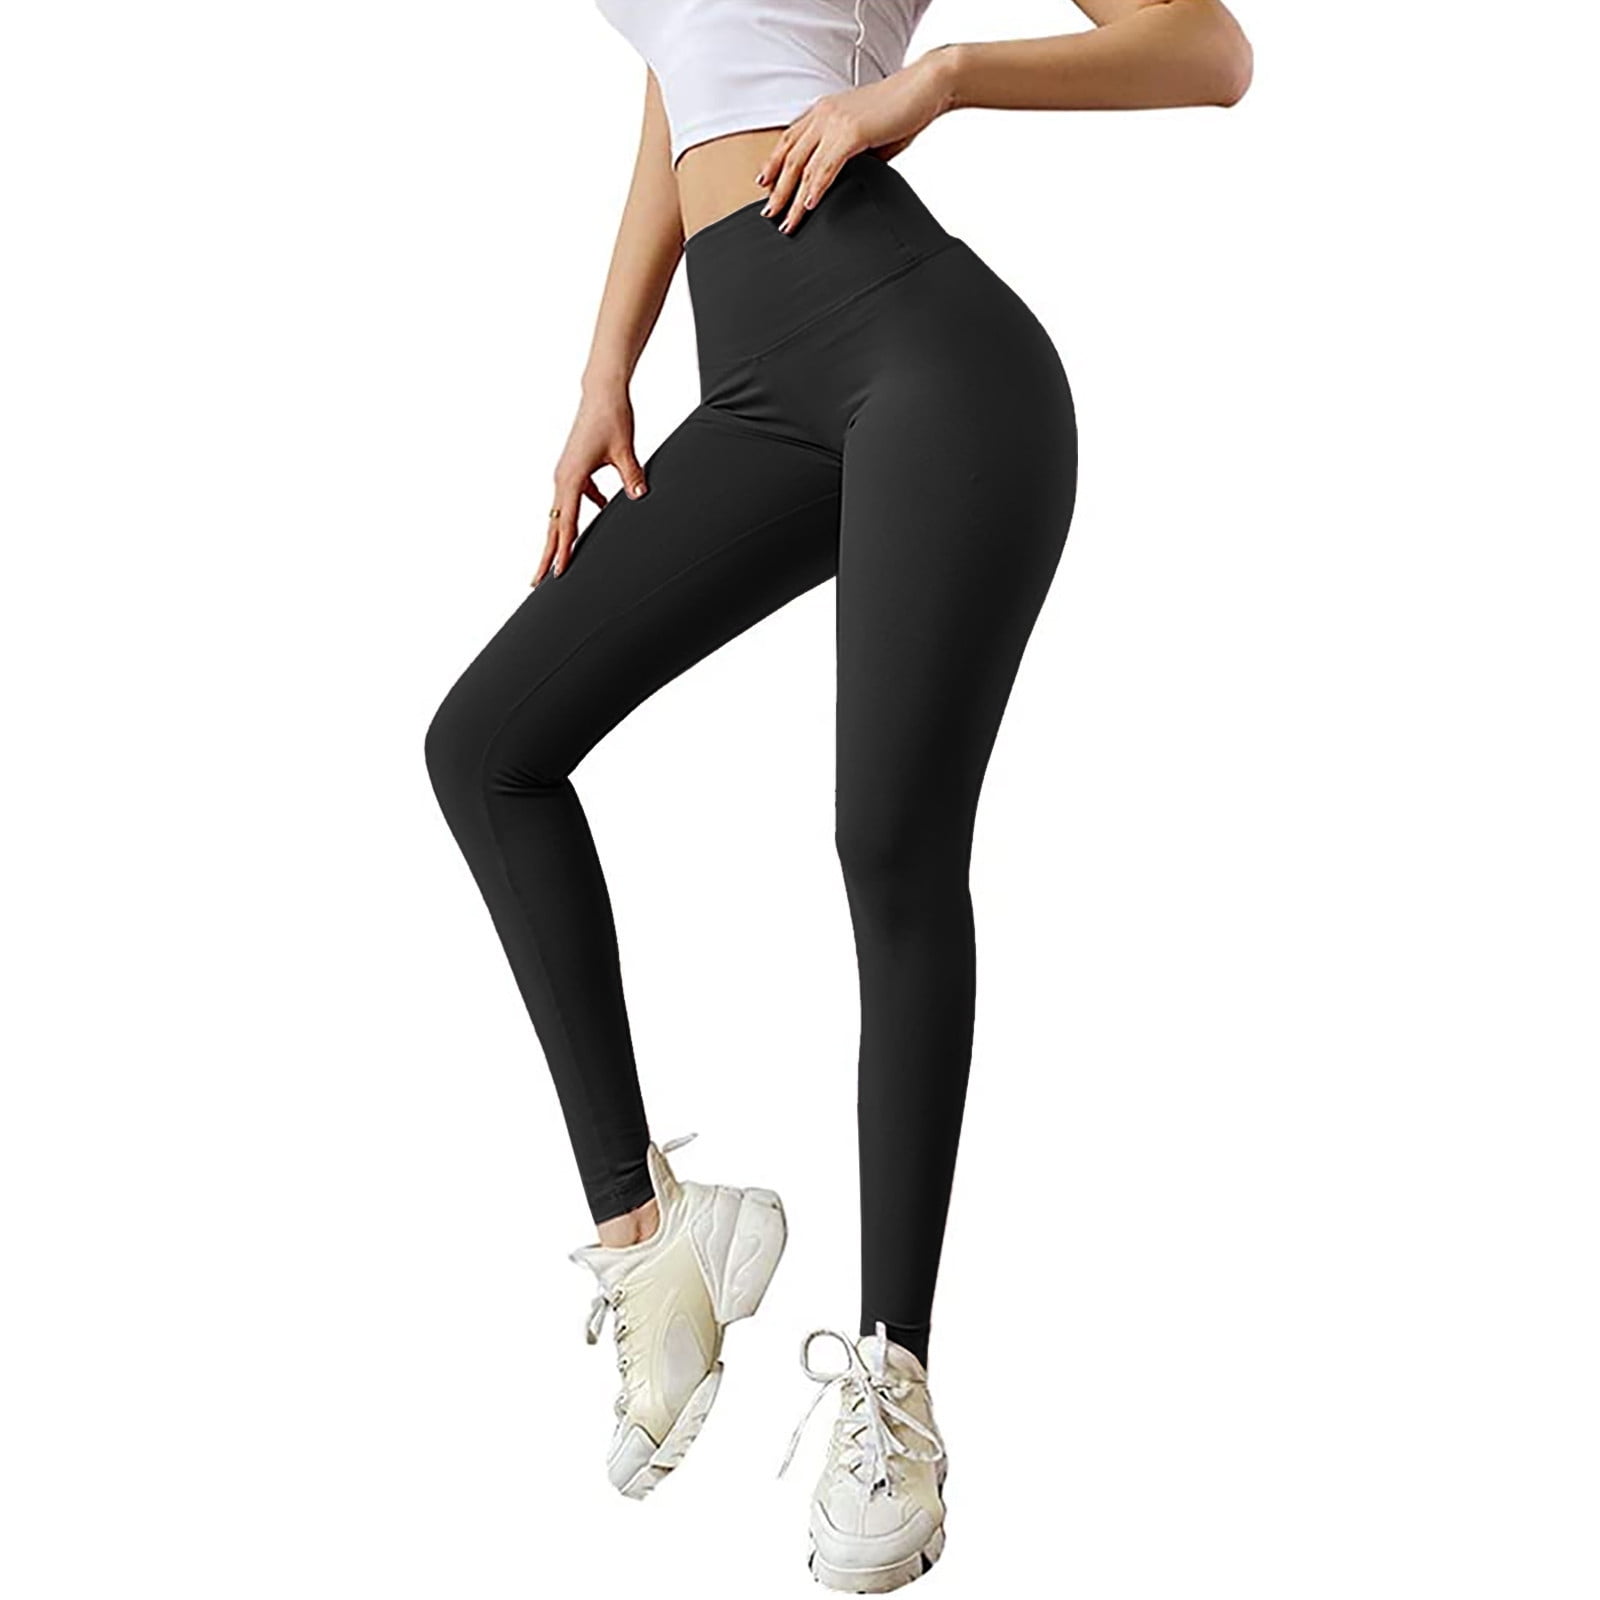 Long Yoga Pants for Women Tall Butt Lifting Workout Leggings Lace Up Bow  Yoga Pants High Waisted Tummy Control Leggings 